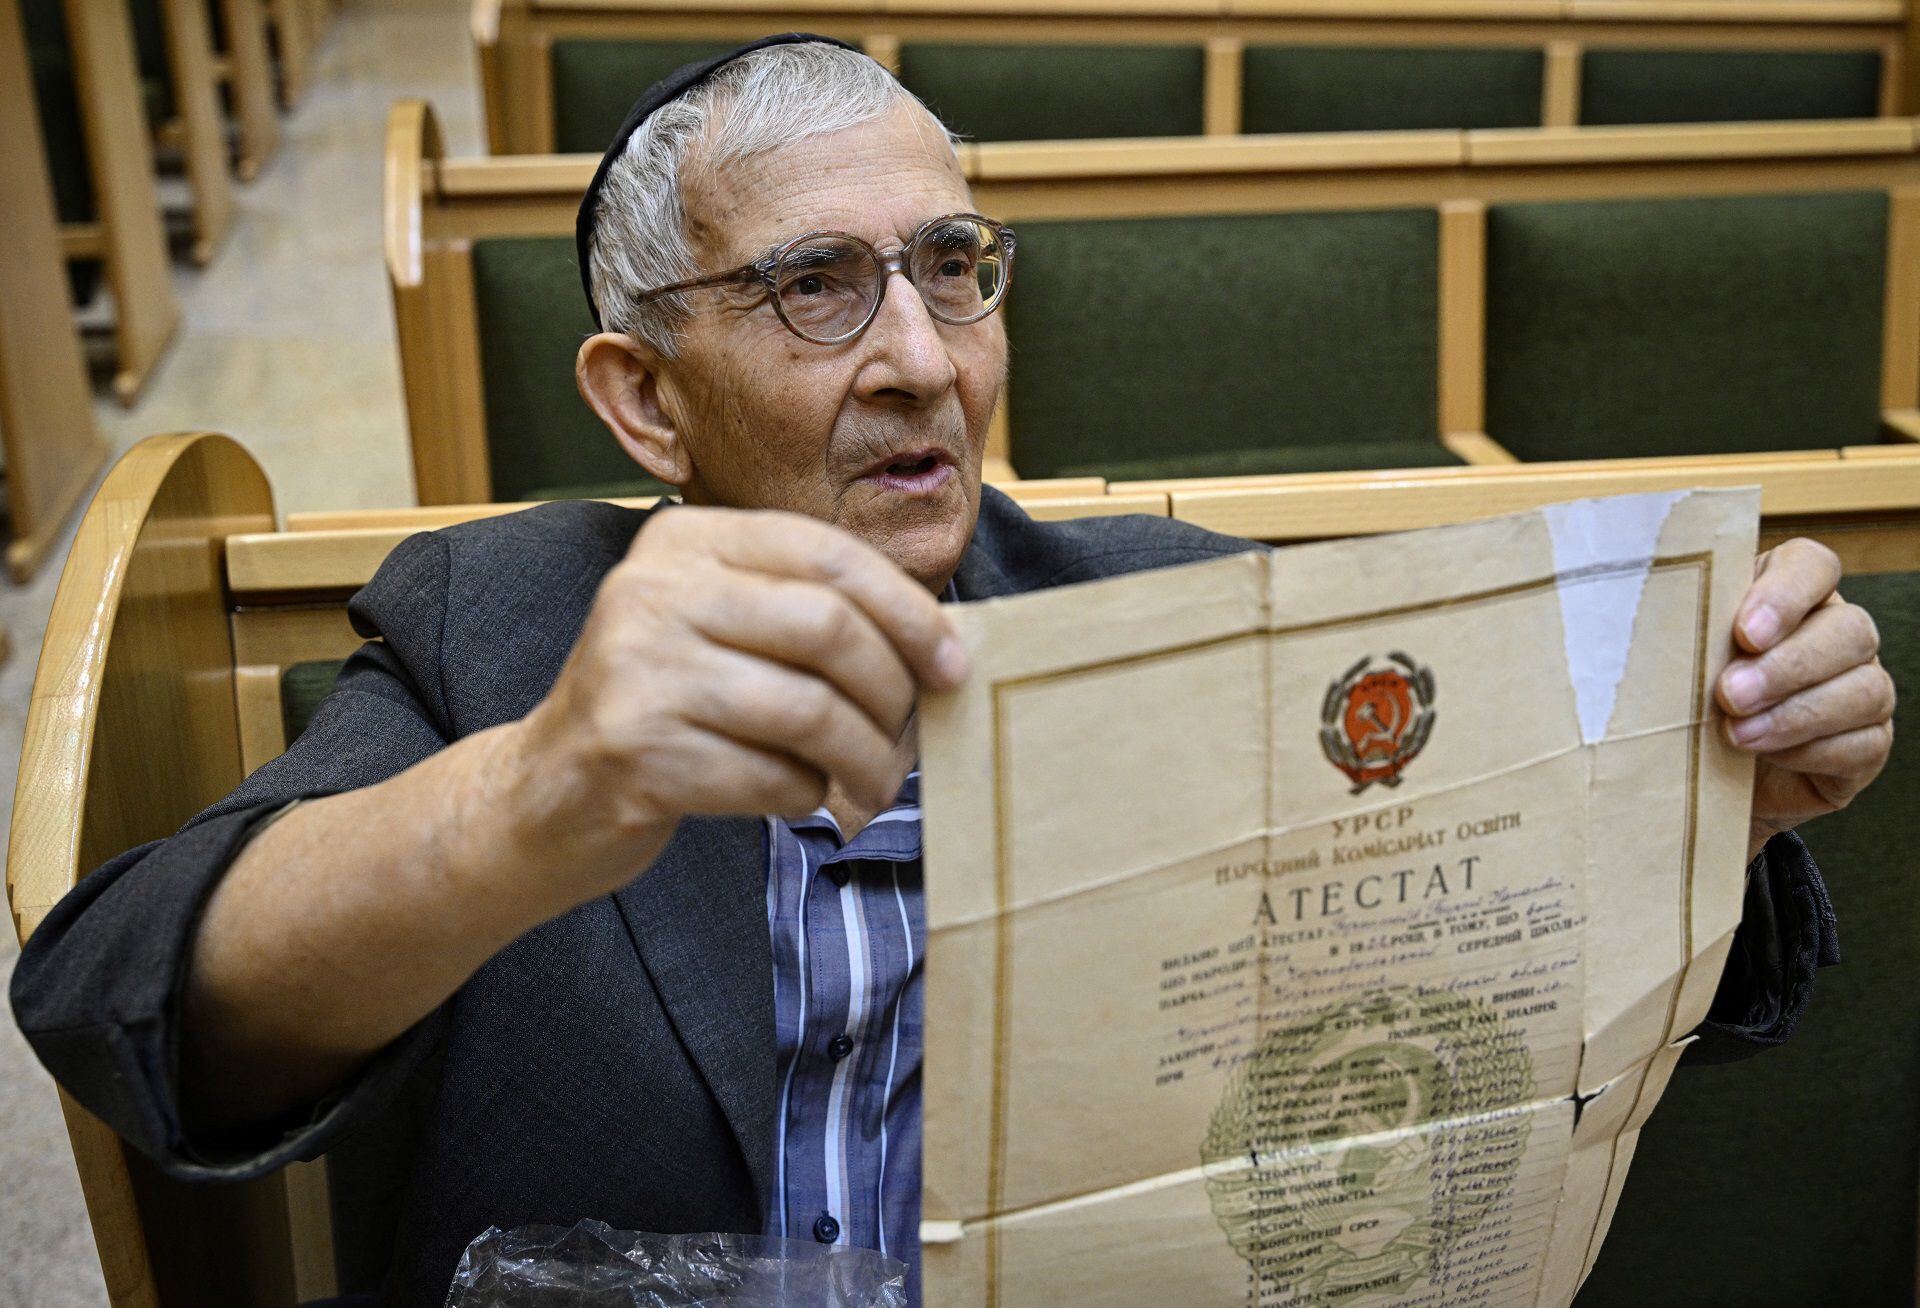 Roman Gerstein, 83-years-old, shows a document from his family archives during an interview with AFP at the Synagogue of Kryvyj Rig, central Ukraine, on September 22, 2022, as the Russia-Ukraine war enters its 211th day. - For some of the Ukranian survivors of the Shoah or Holocaus that caused some 1.5 million deaths in Ukraine, today "there are no nazis" in their country, as opposed to what Moscow's Kremlin says as one of its justifications for the Russian invasion of Ukraine on February 24, 2022. (Photo by Genya SAVILOV / AFP)